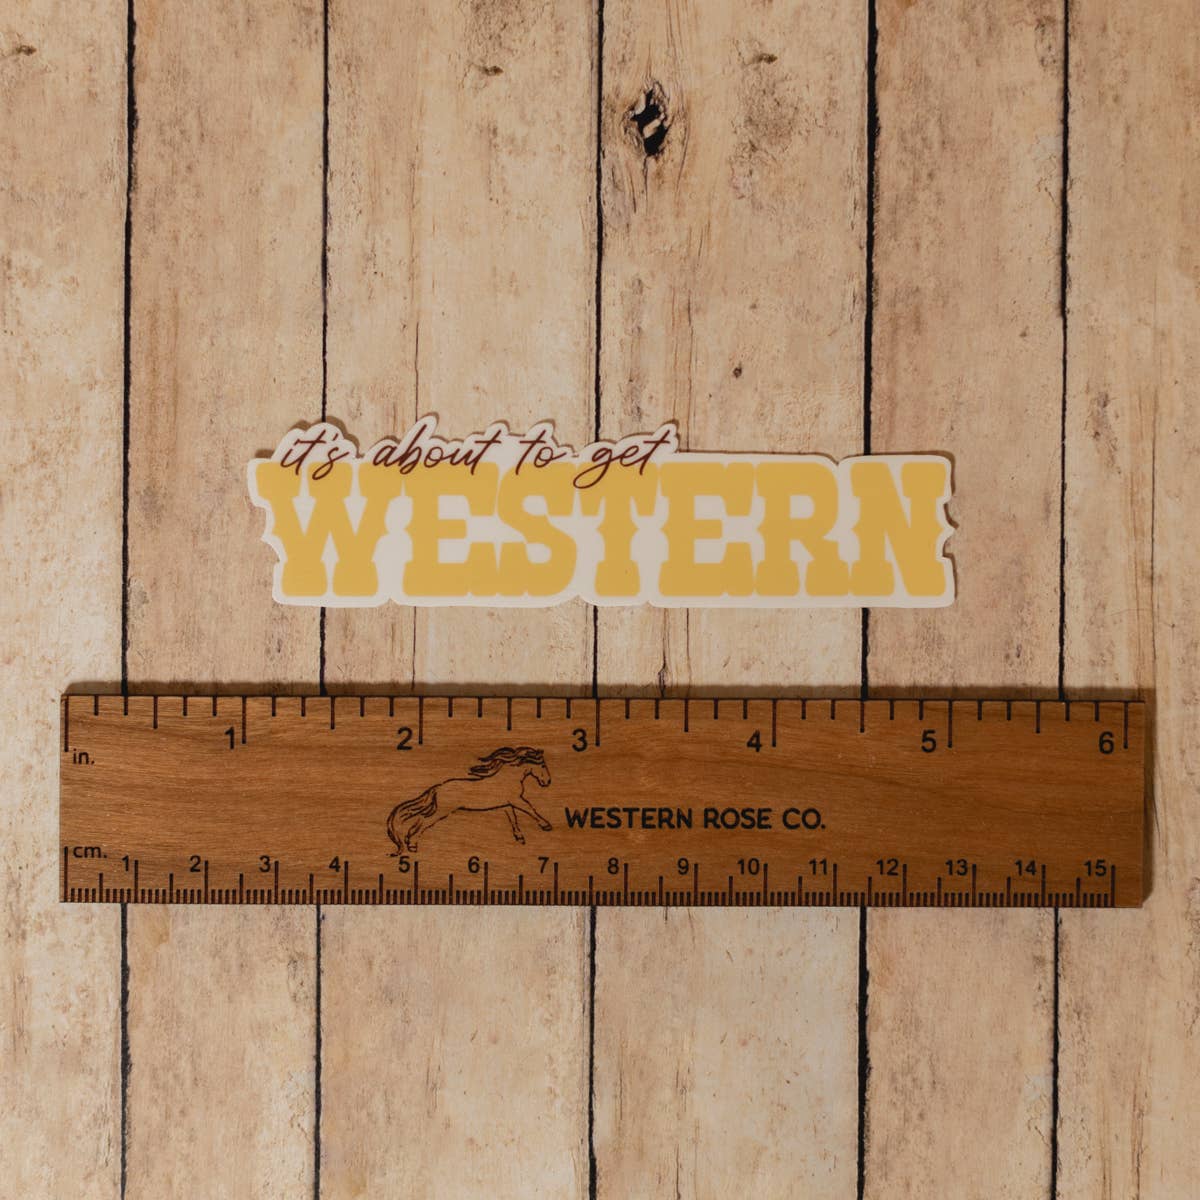 "It's About to Get Western" Sticker